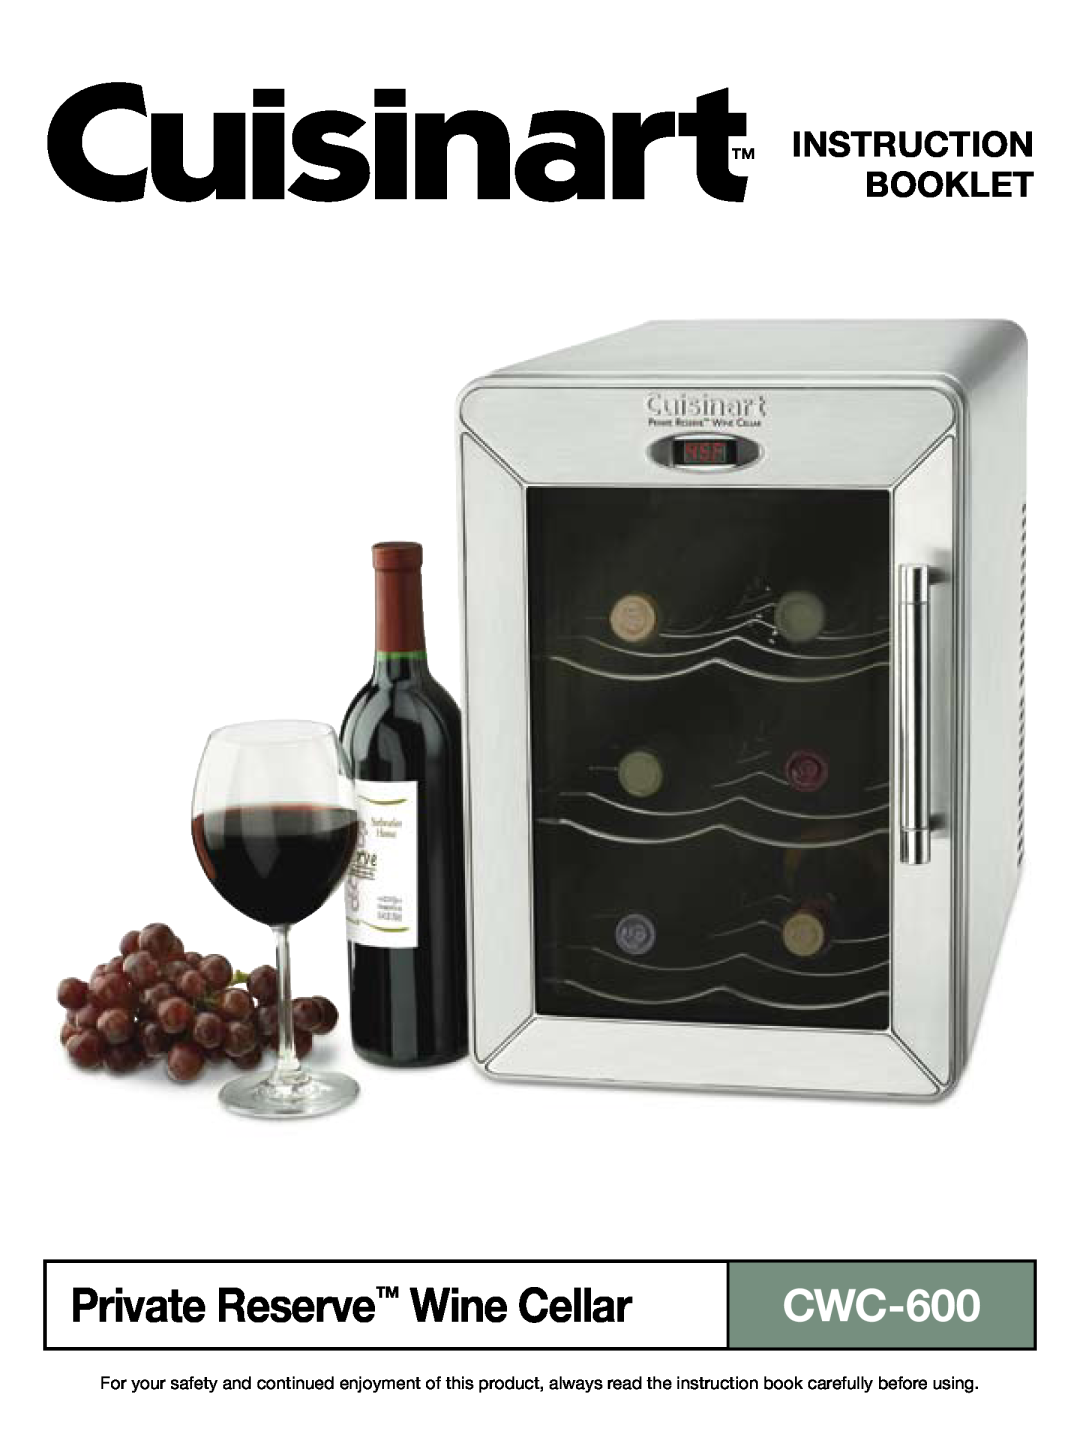 Cuisinart CWC-600 manual Private Reserve Wine Cellar, Instruction Booklet 